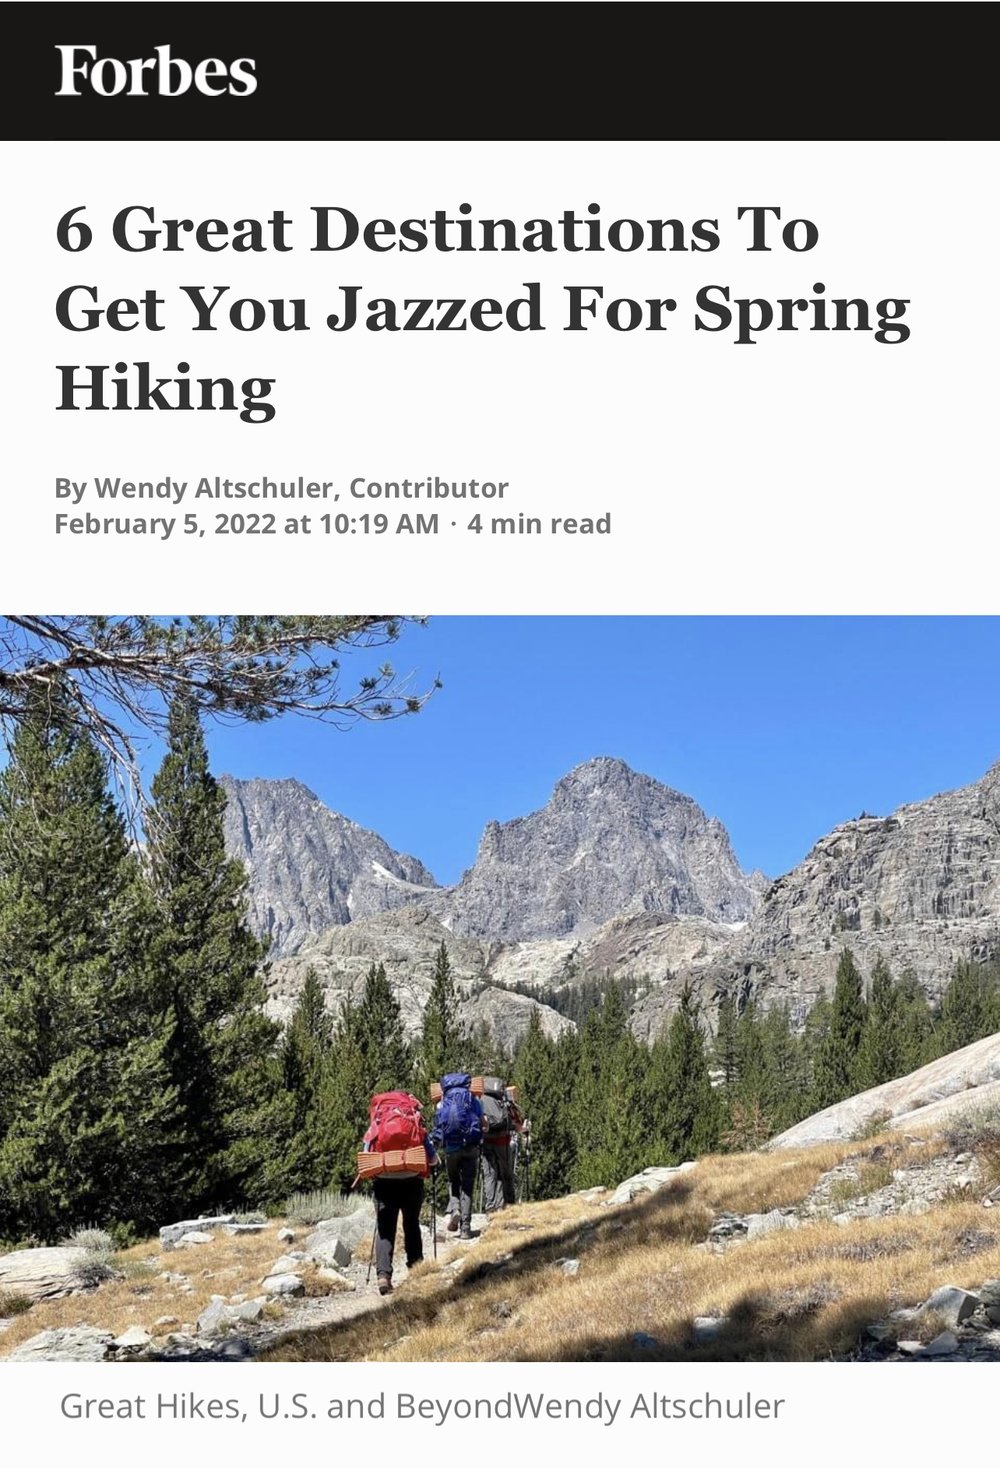 6 Great Destinations To Get You Jazzed For Spring Hiking